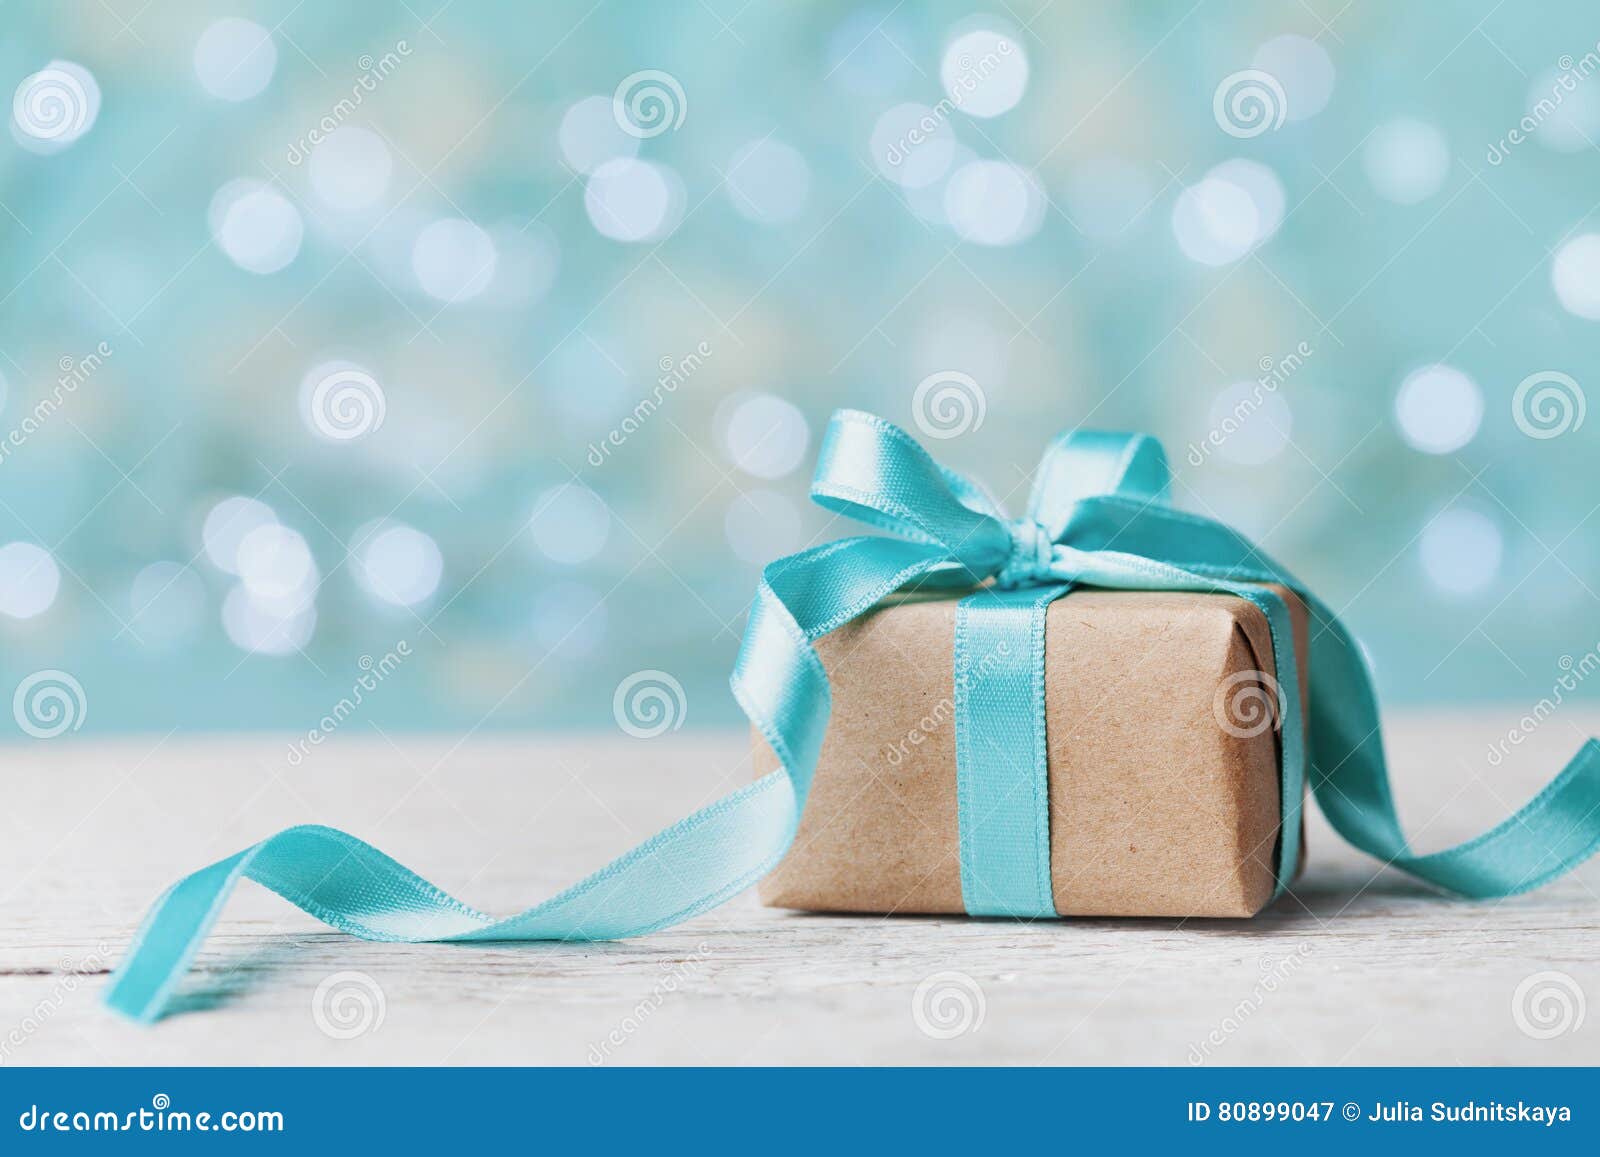 christmas gift box against turquoise bokeh background. holiday greeting card.